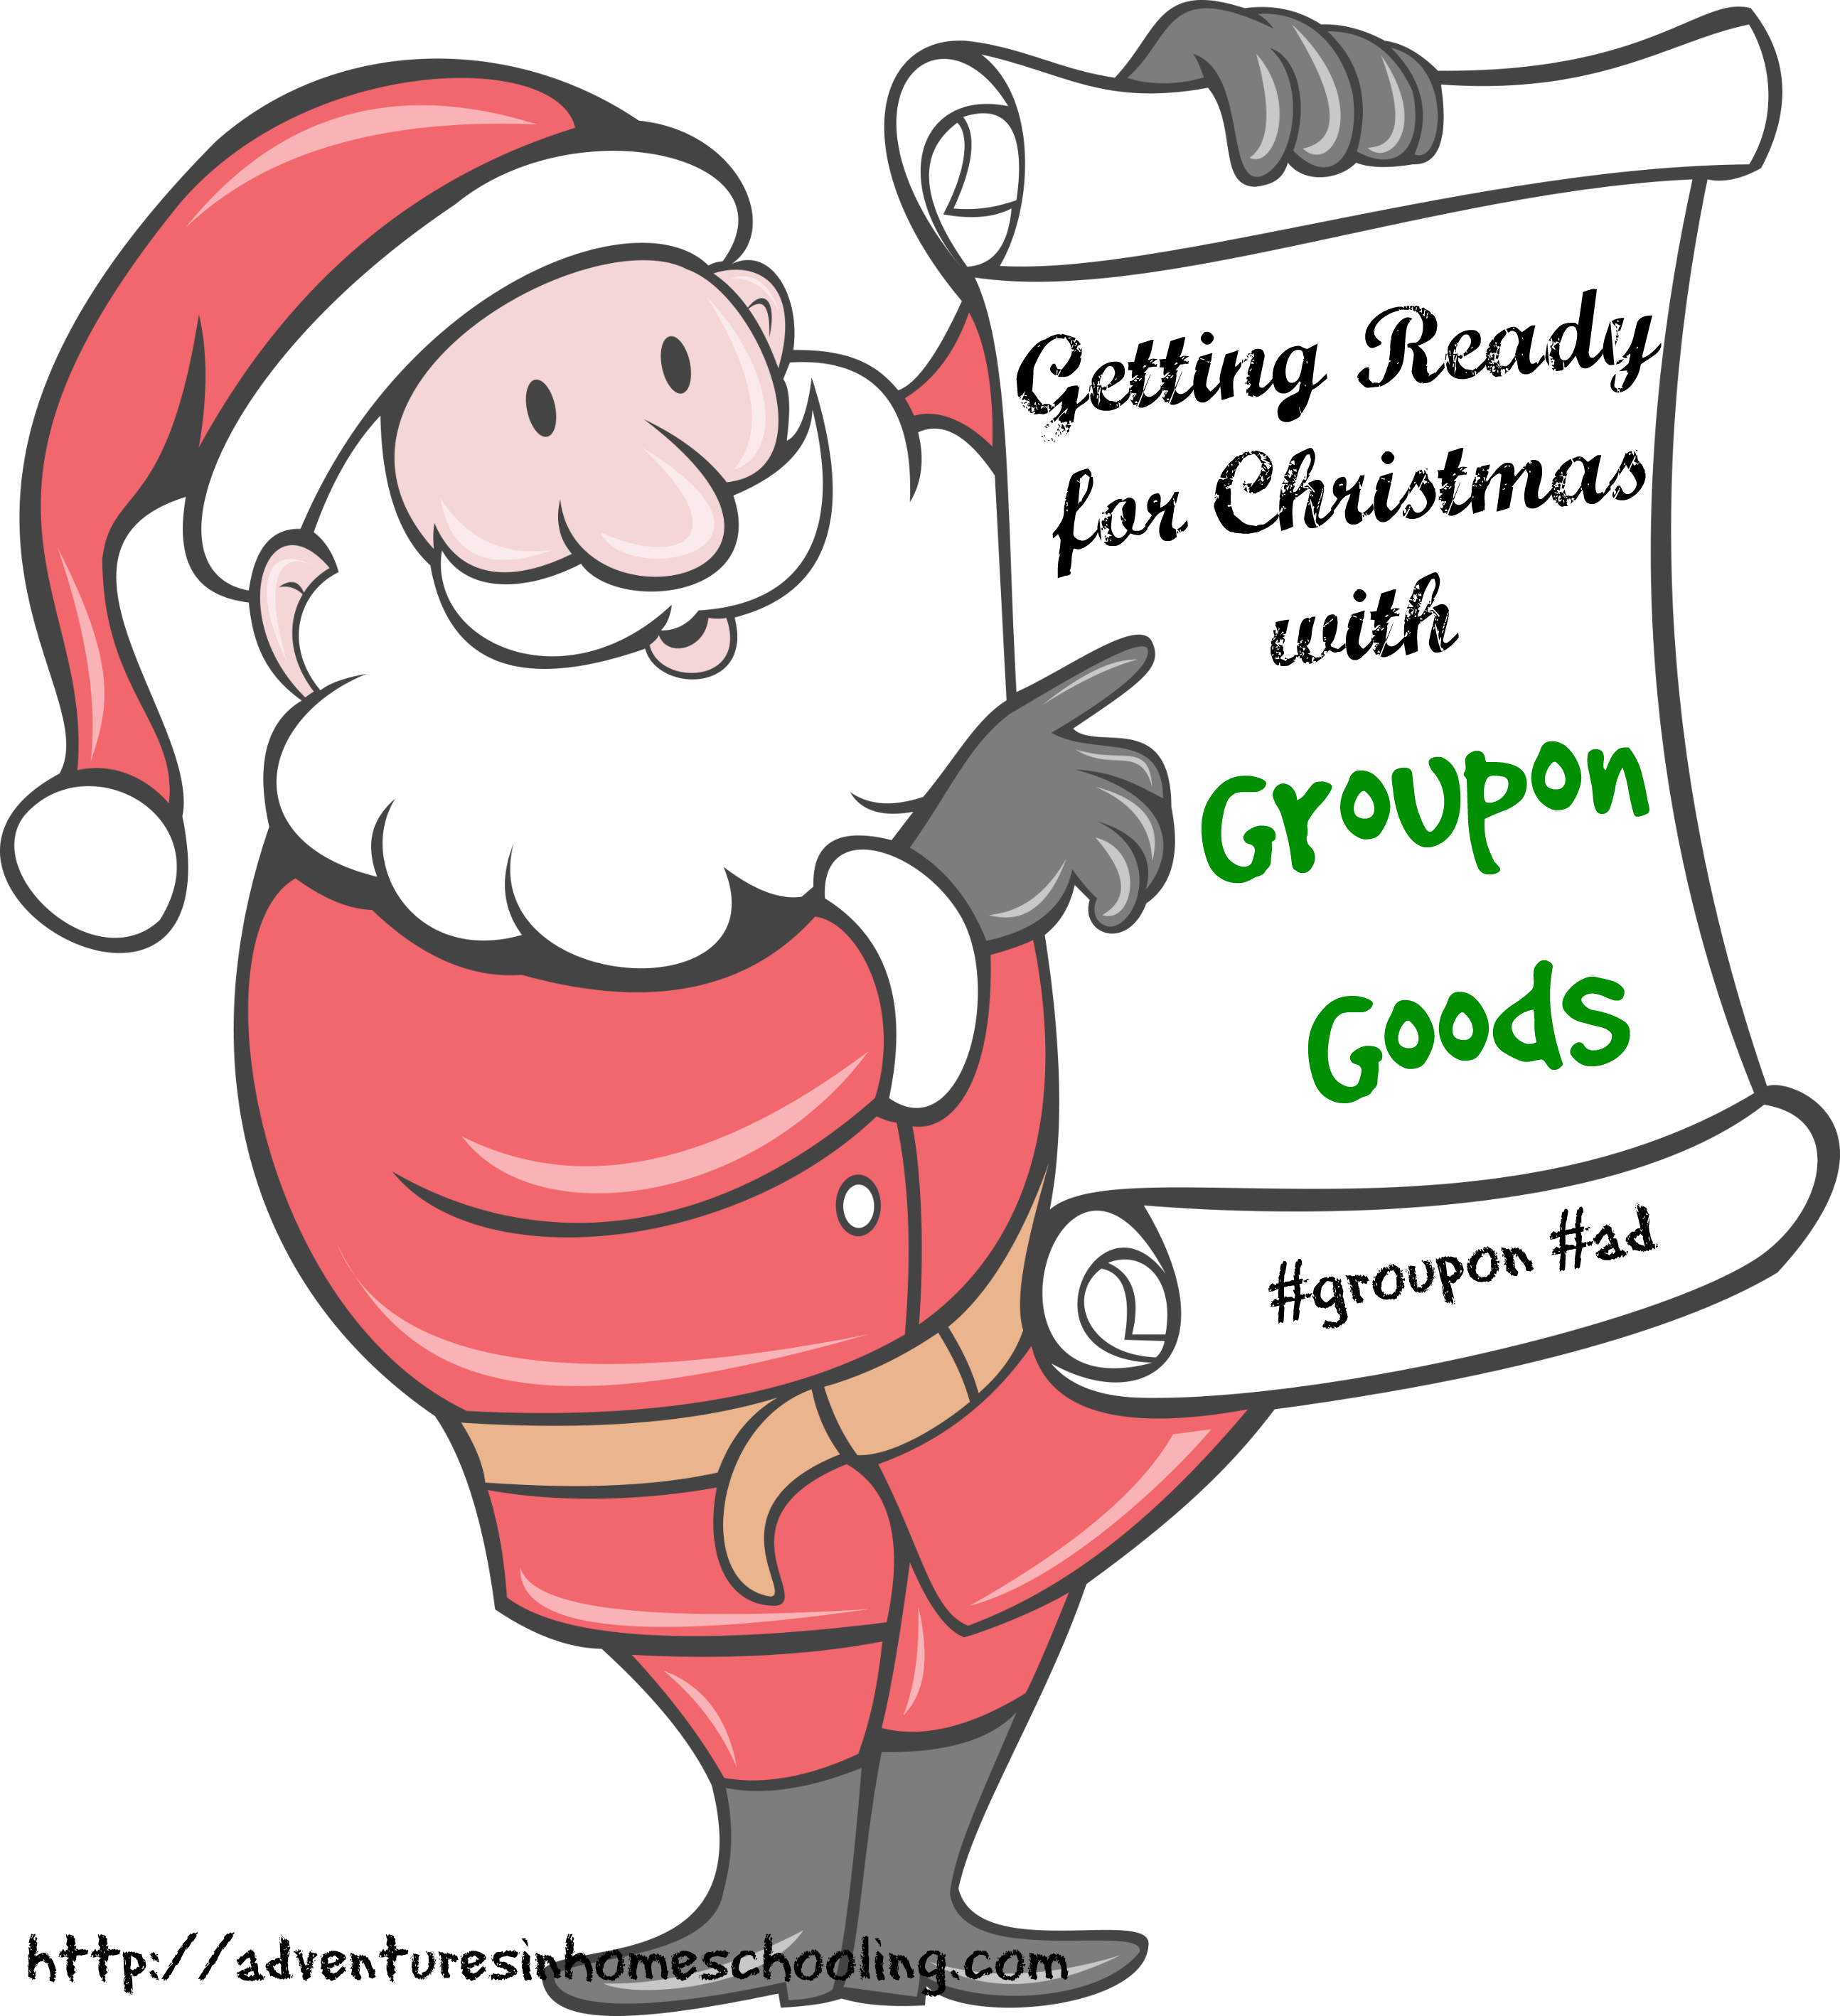 Download Getting Ready For Christmas With Groupon Goods Father Christmas Cartoon Png Image